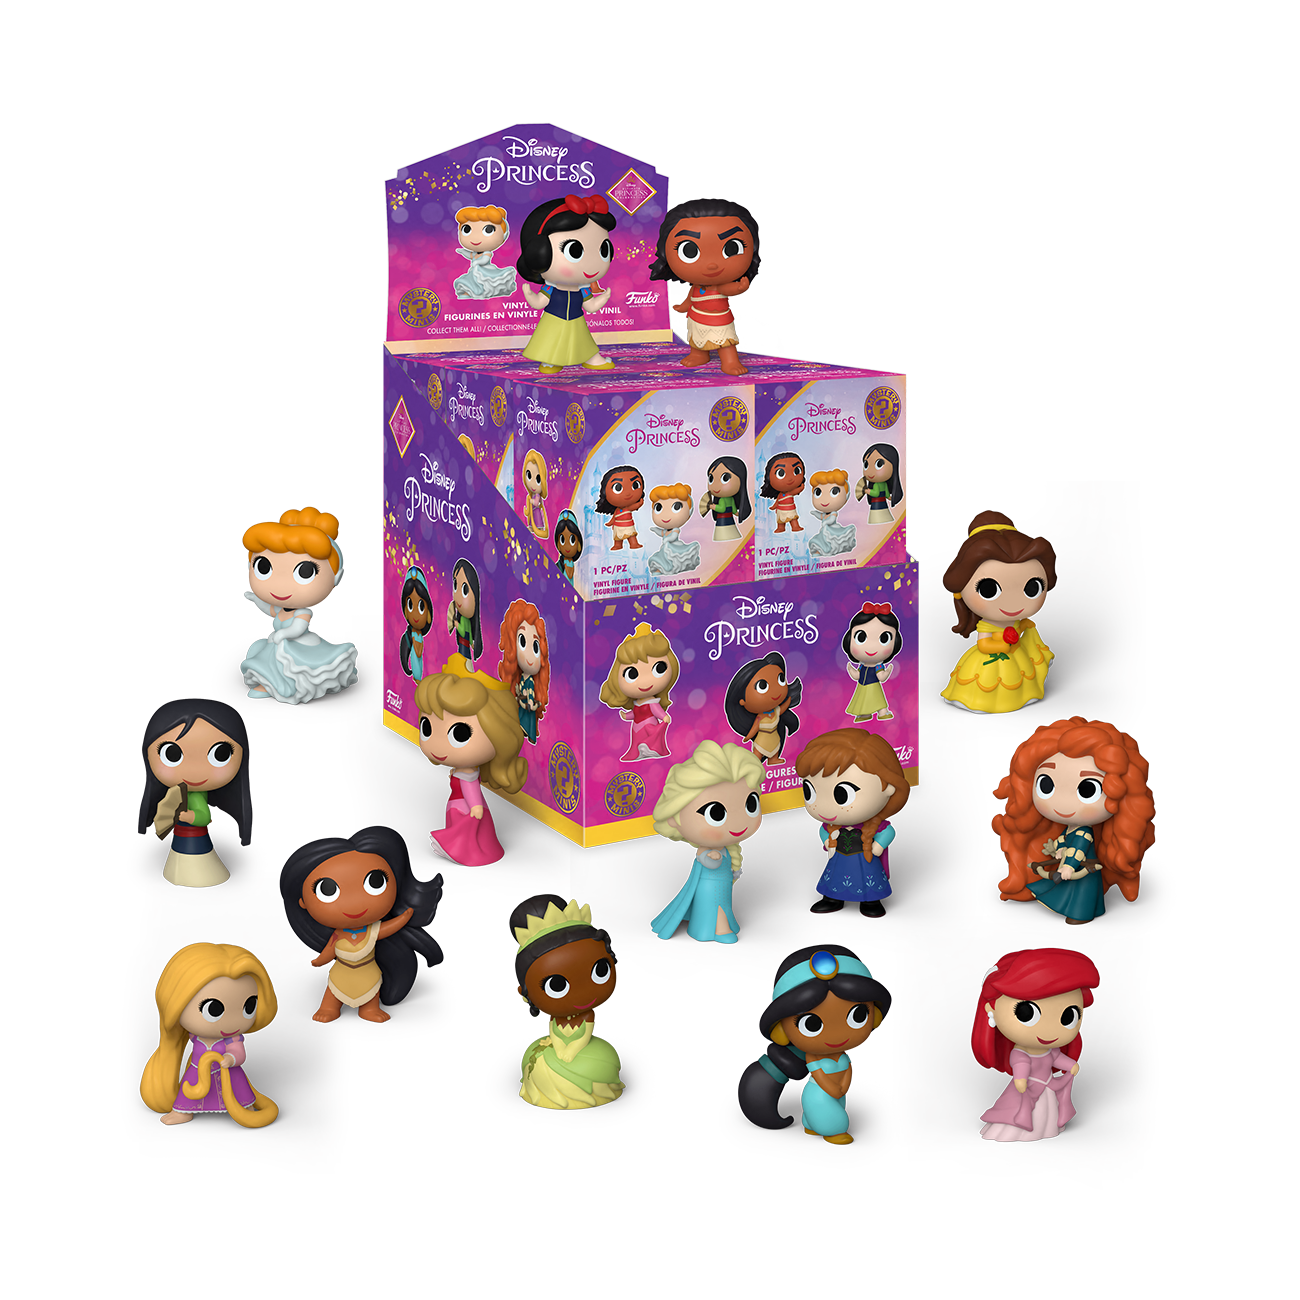 The Disney Afternoon S1 Case for sale online Funko Mystery Minis Vinyl Figure 